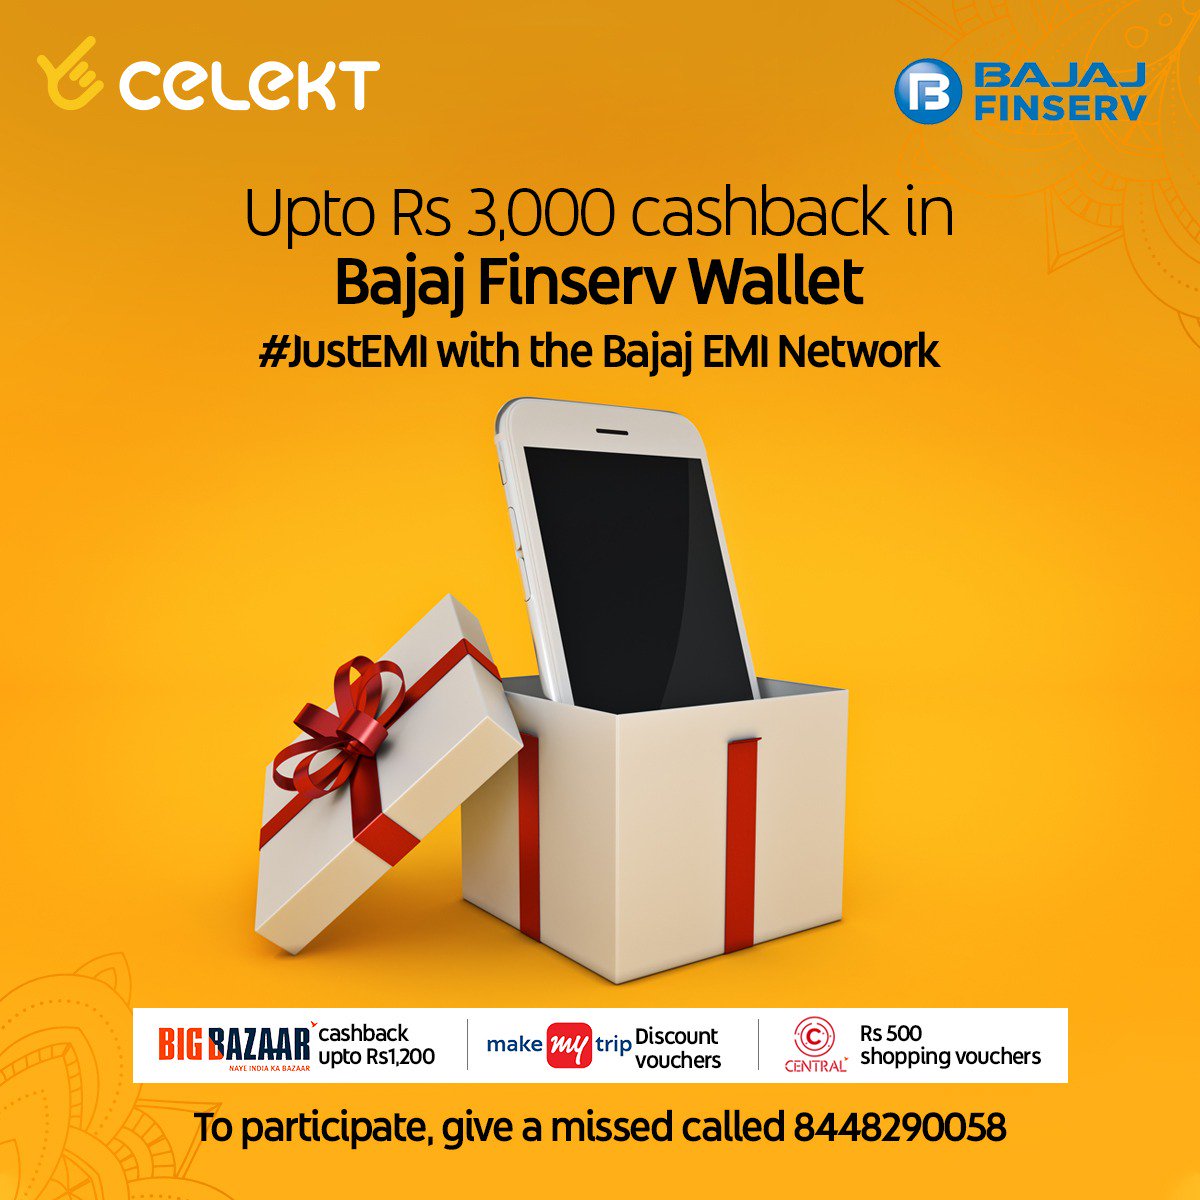 Celekt Mobiles Justemi Using Your Bajaj Finserv Card At Any Celekt Store And Get Up To Rs 3000 Cashback In Your Wallet Along With Various Shopping Vouchers And Discounts Give A